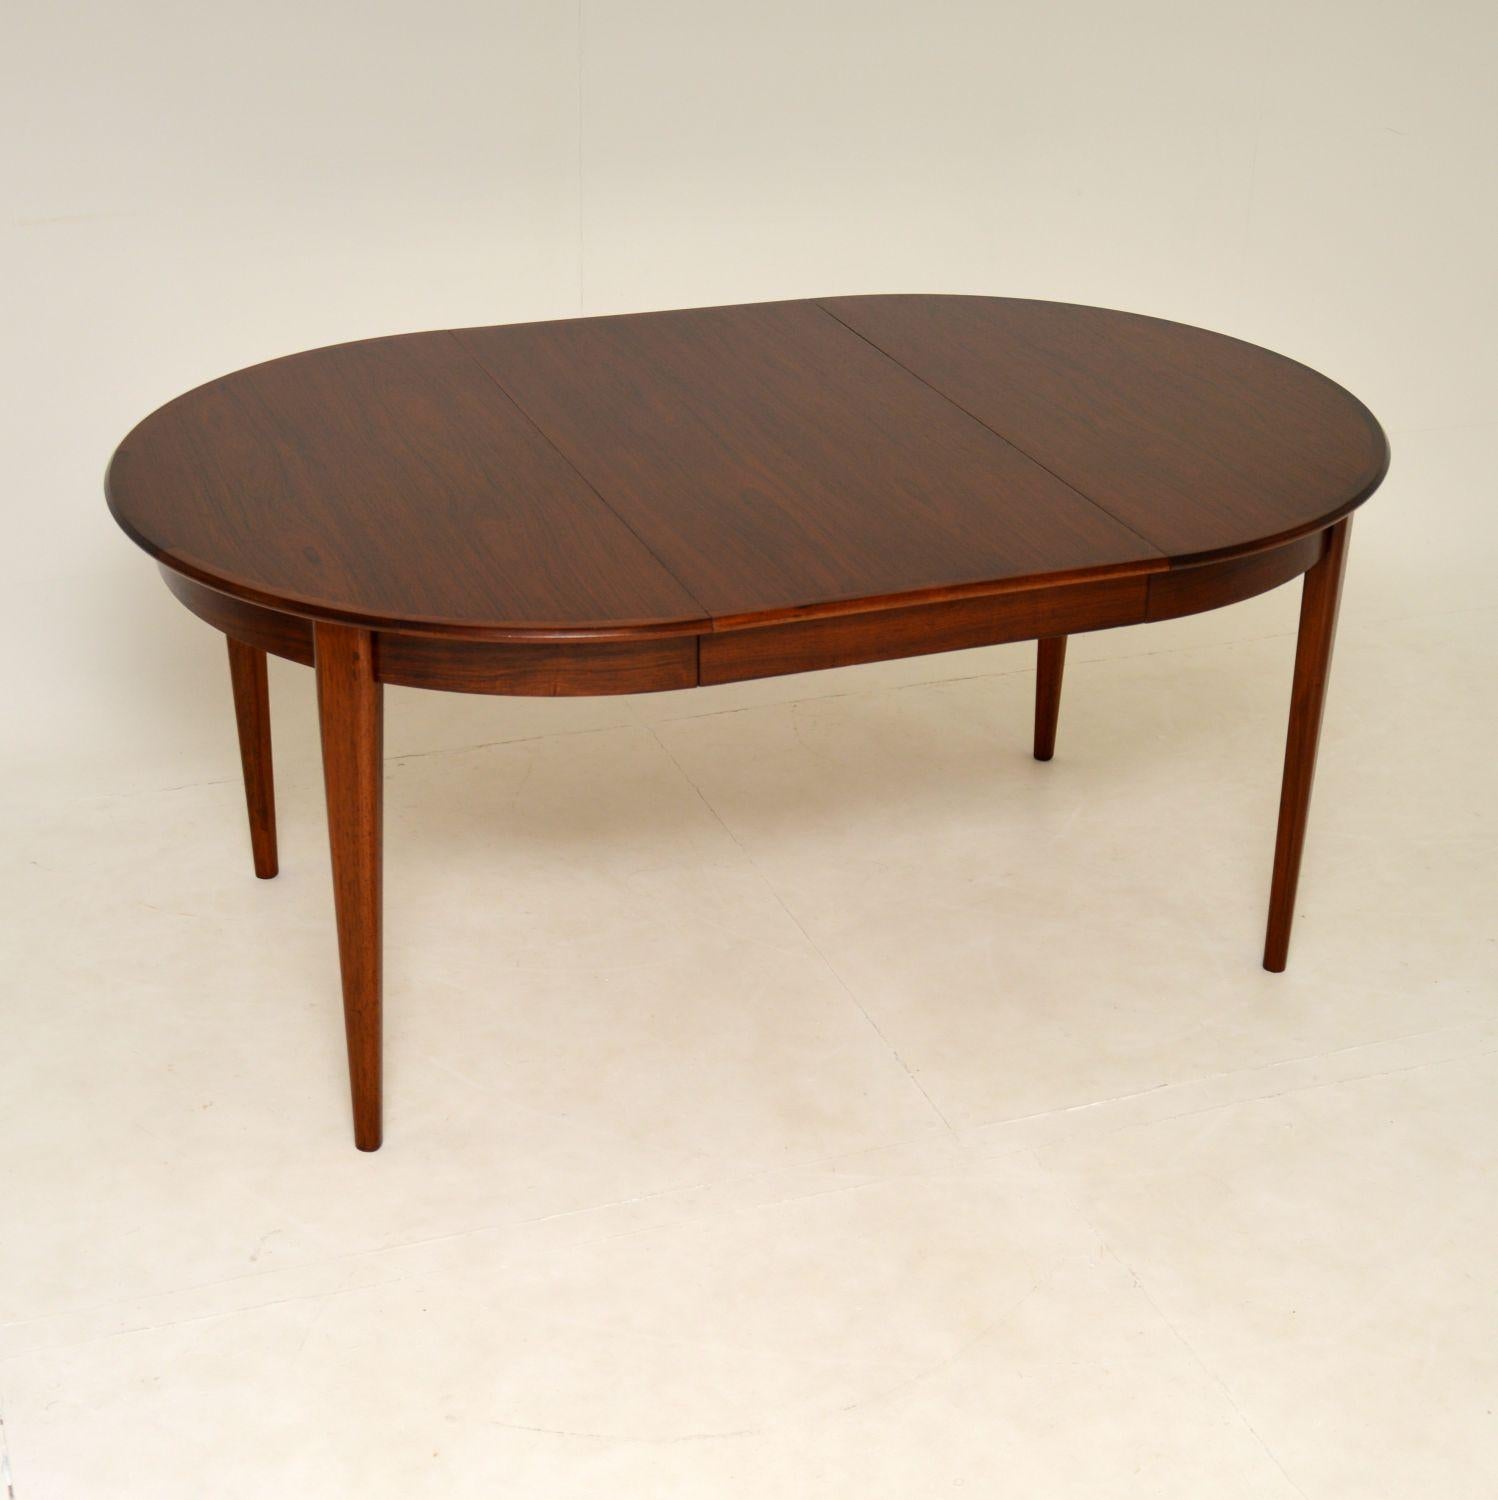 A stunning vintage Danish dining table. This was made in the 1960’s, it is the model 55 table designed by Gunni Omann for Omann Junior Mobelfabrik. It has the Danish quality control stamp below the top.

It is circular when closed, and comes with